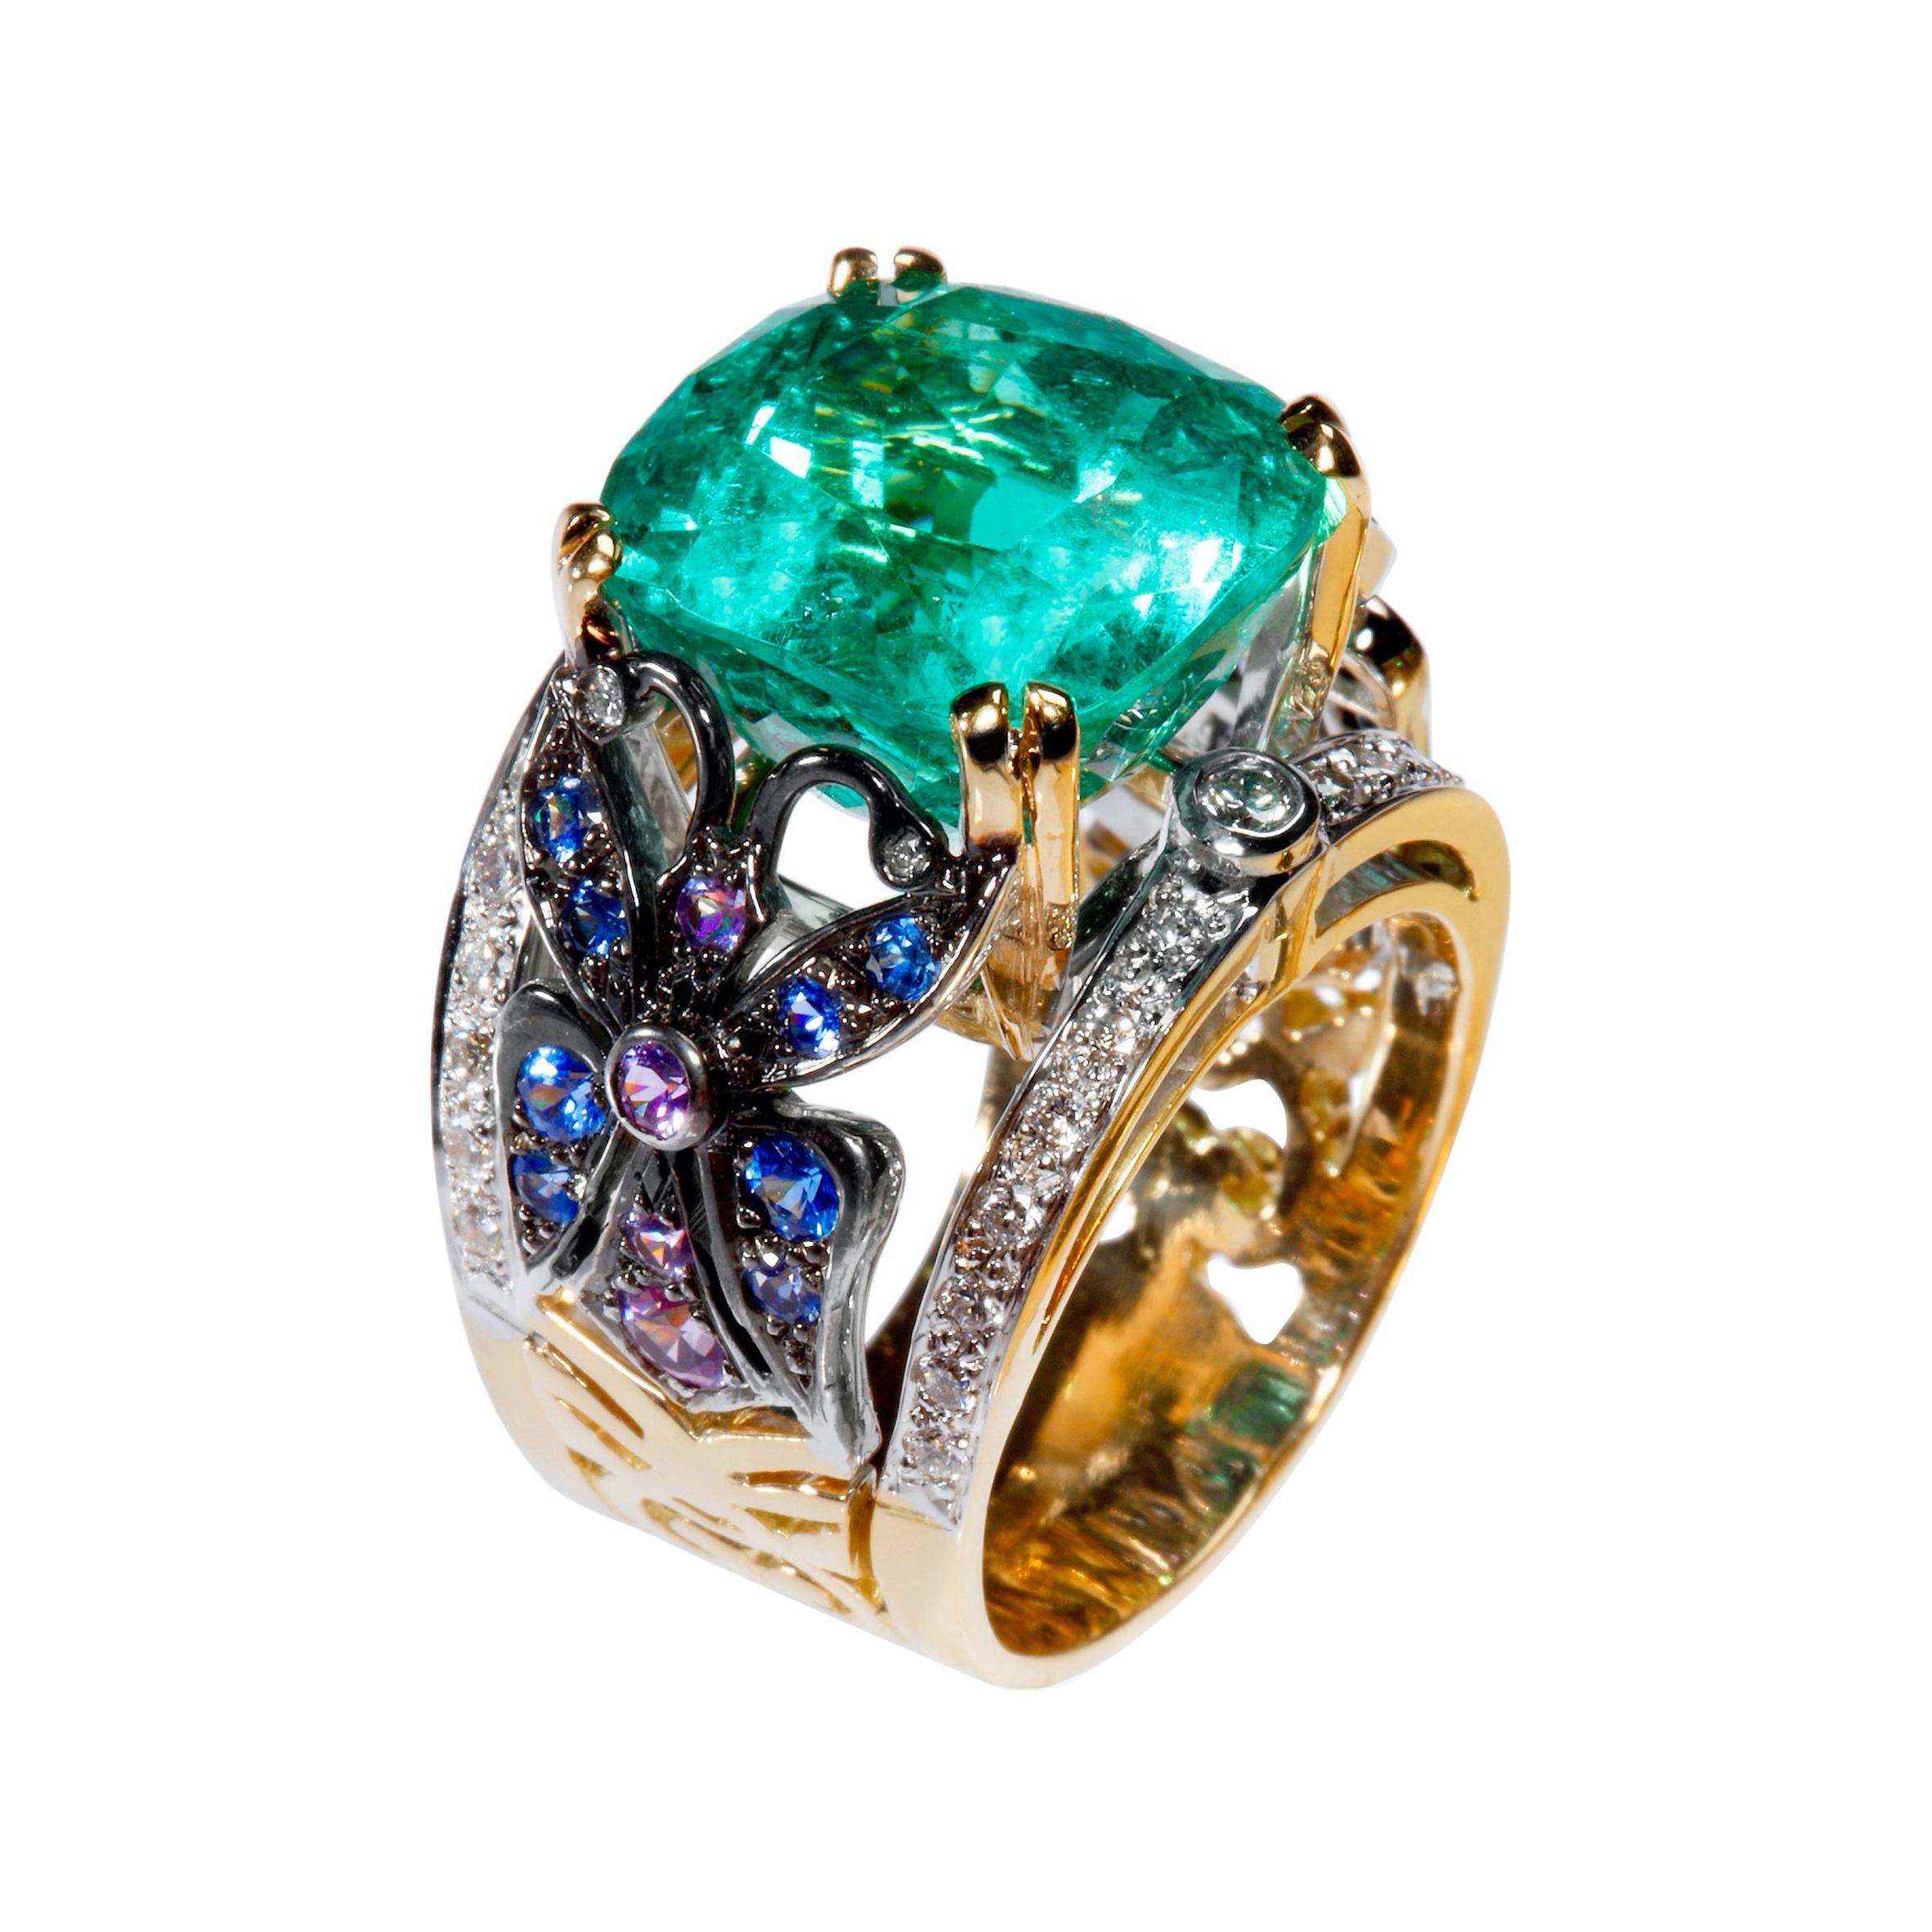 11.5 Carat Colombian Emerald, Sapphires, Diamond Gold Embroidery Ring by Édéenne For Sale